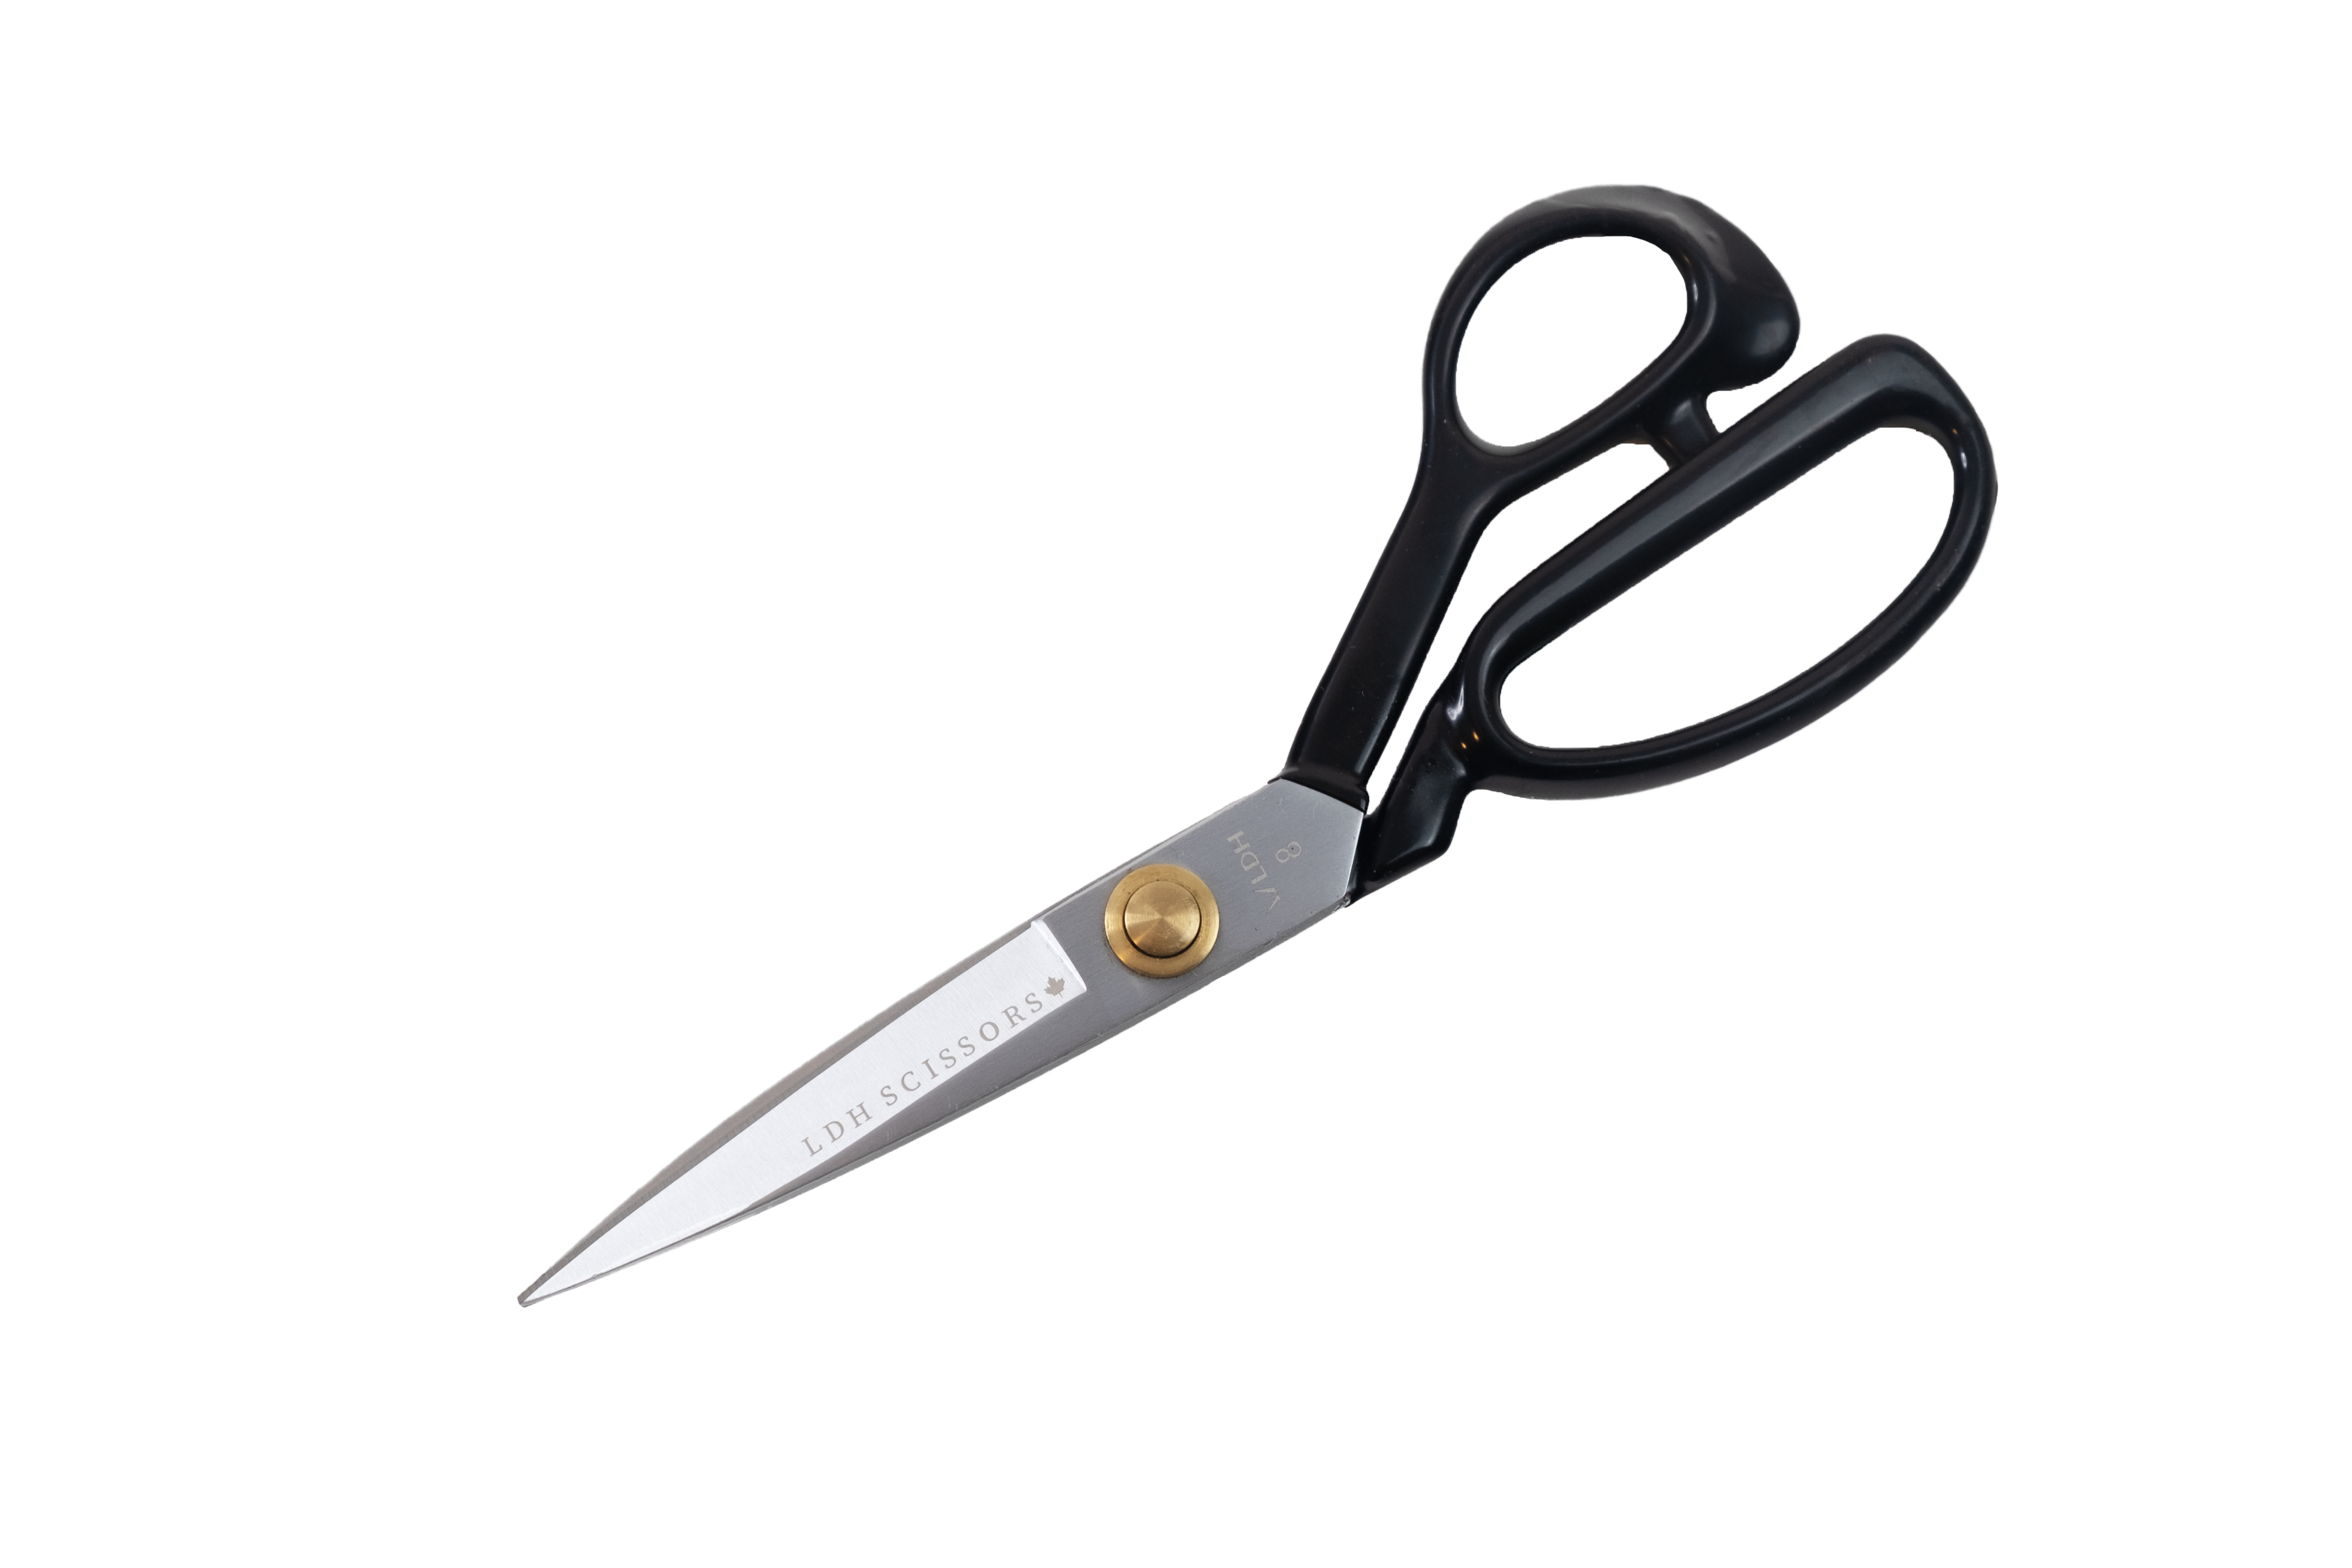 8 True Left-handed Classic Fabric Shears